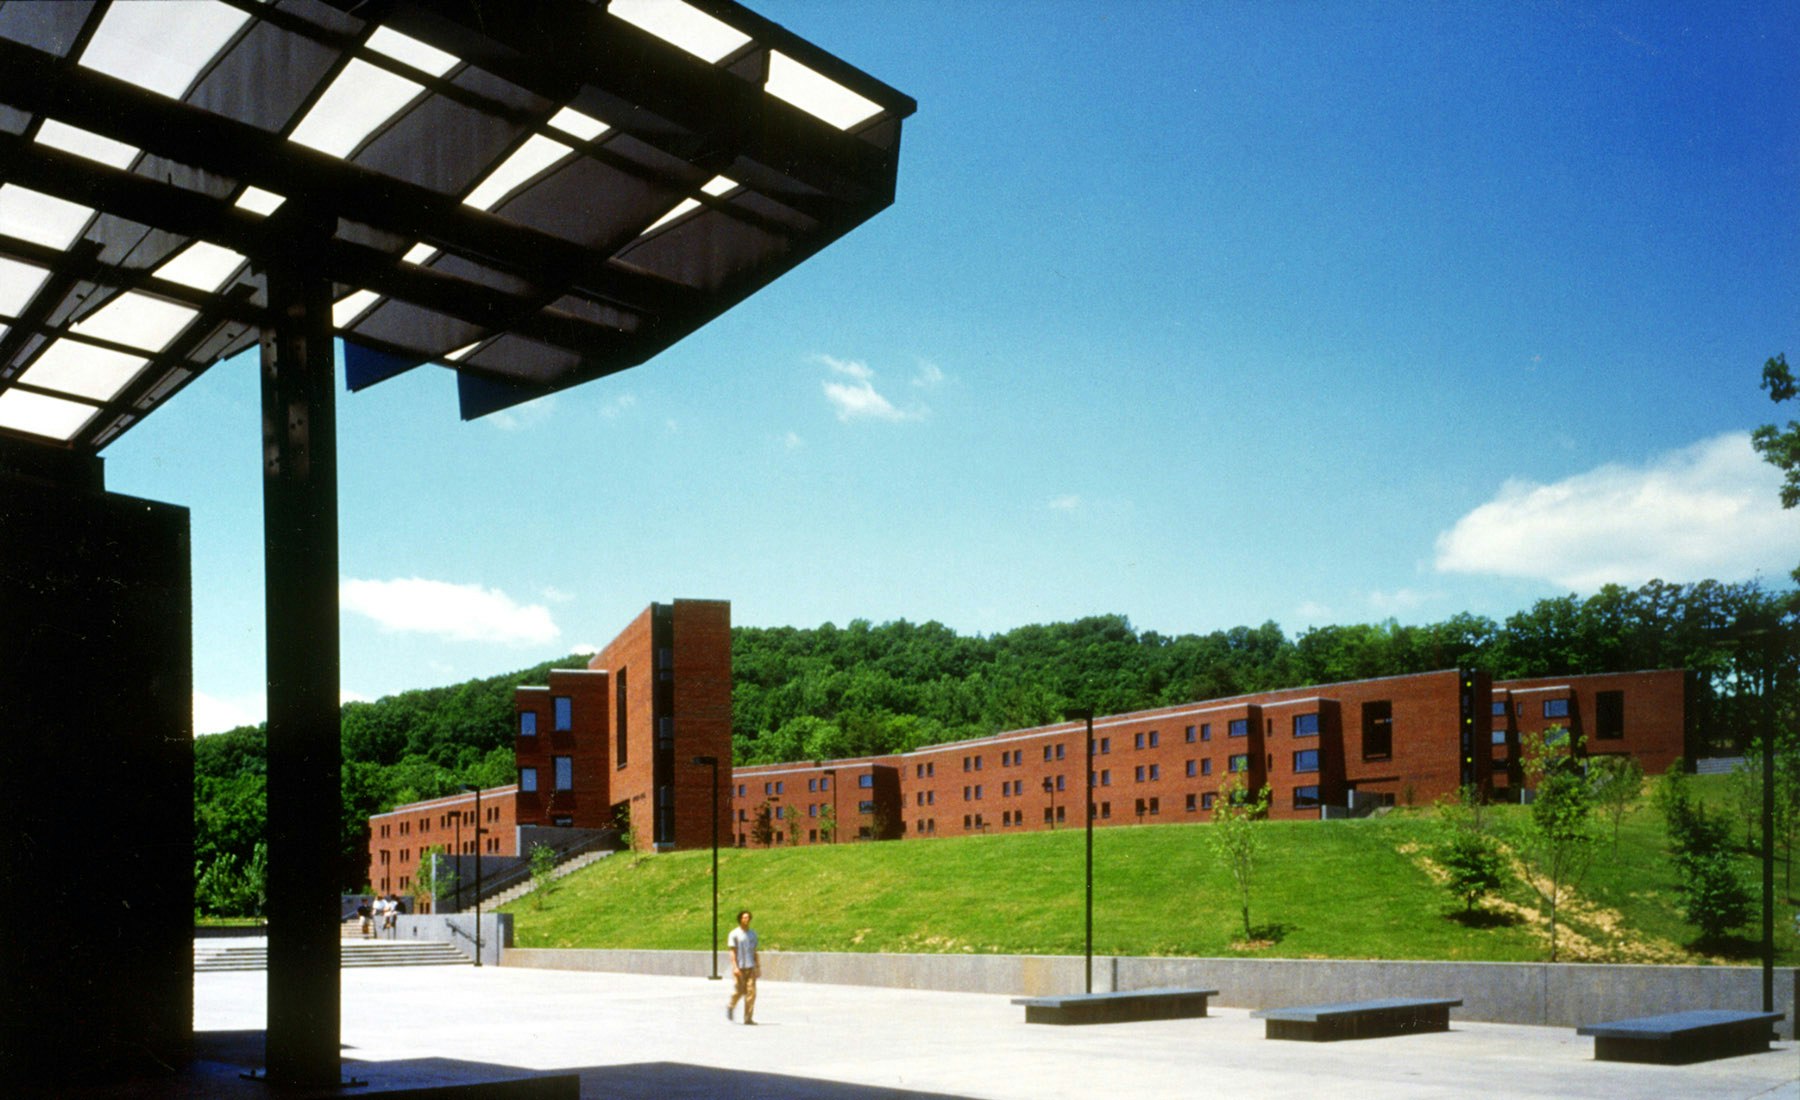 Hereford College, at the University of Virginia, is a residential college inspired by the paradigm of Jefferson’s Academic Village.